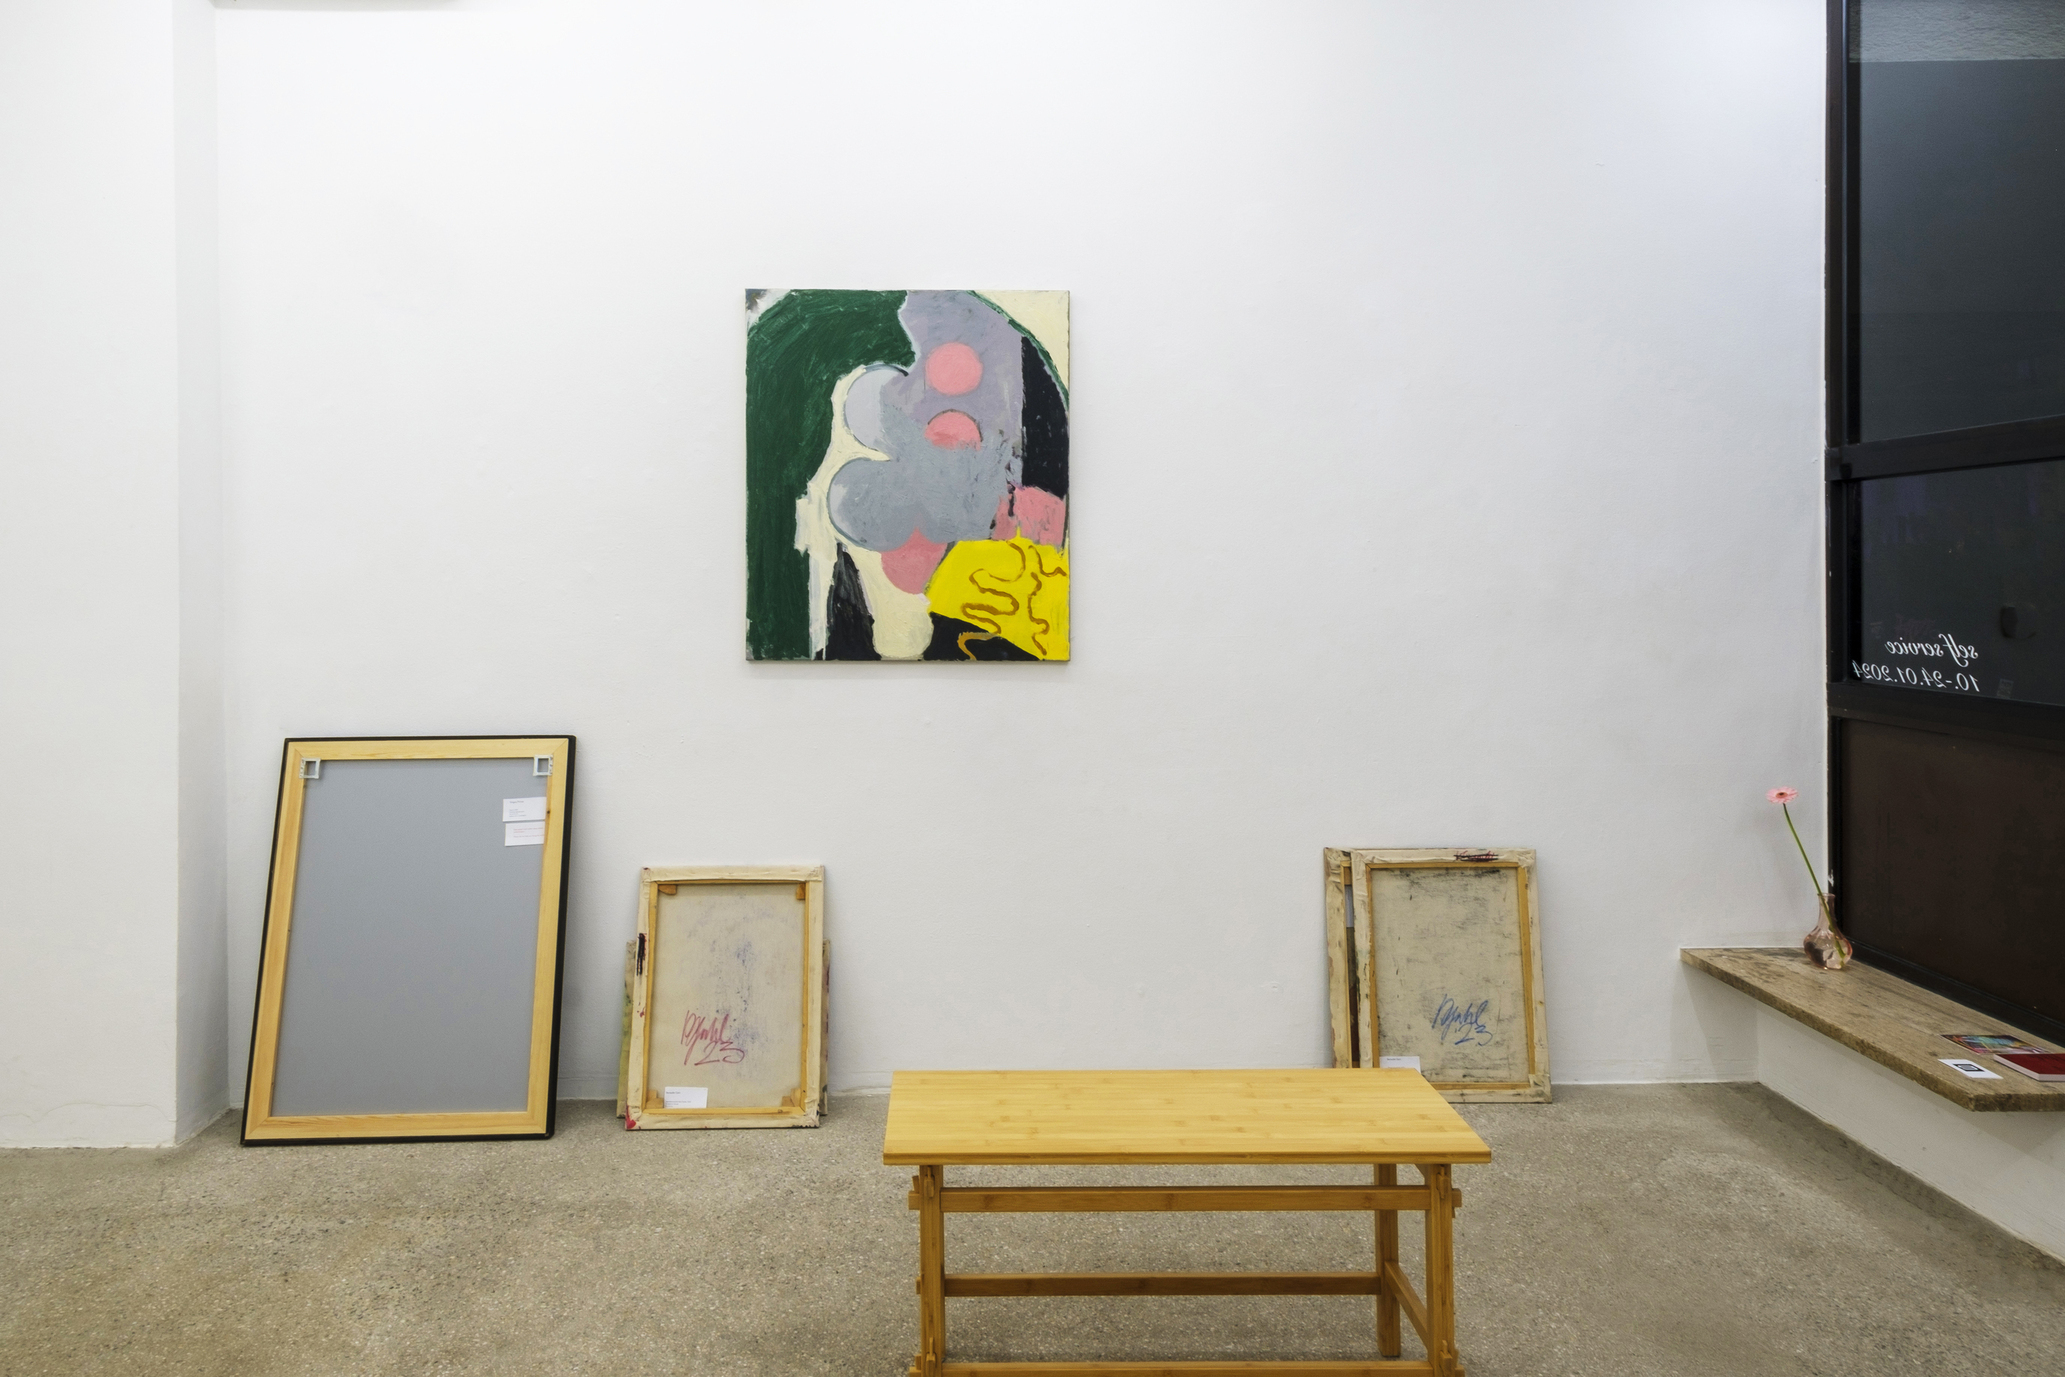 Installation view, "Self Service", with work by Benedikt Gahl, "Lying," 2023, Oil paint on canvas, 93x80 cm